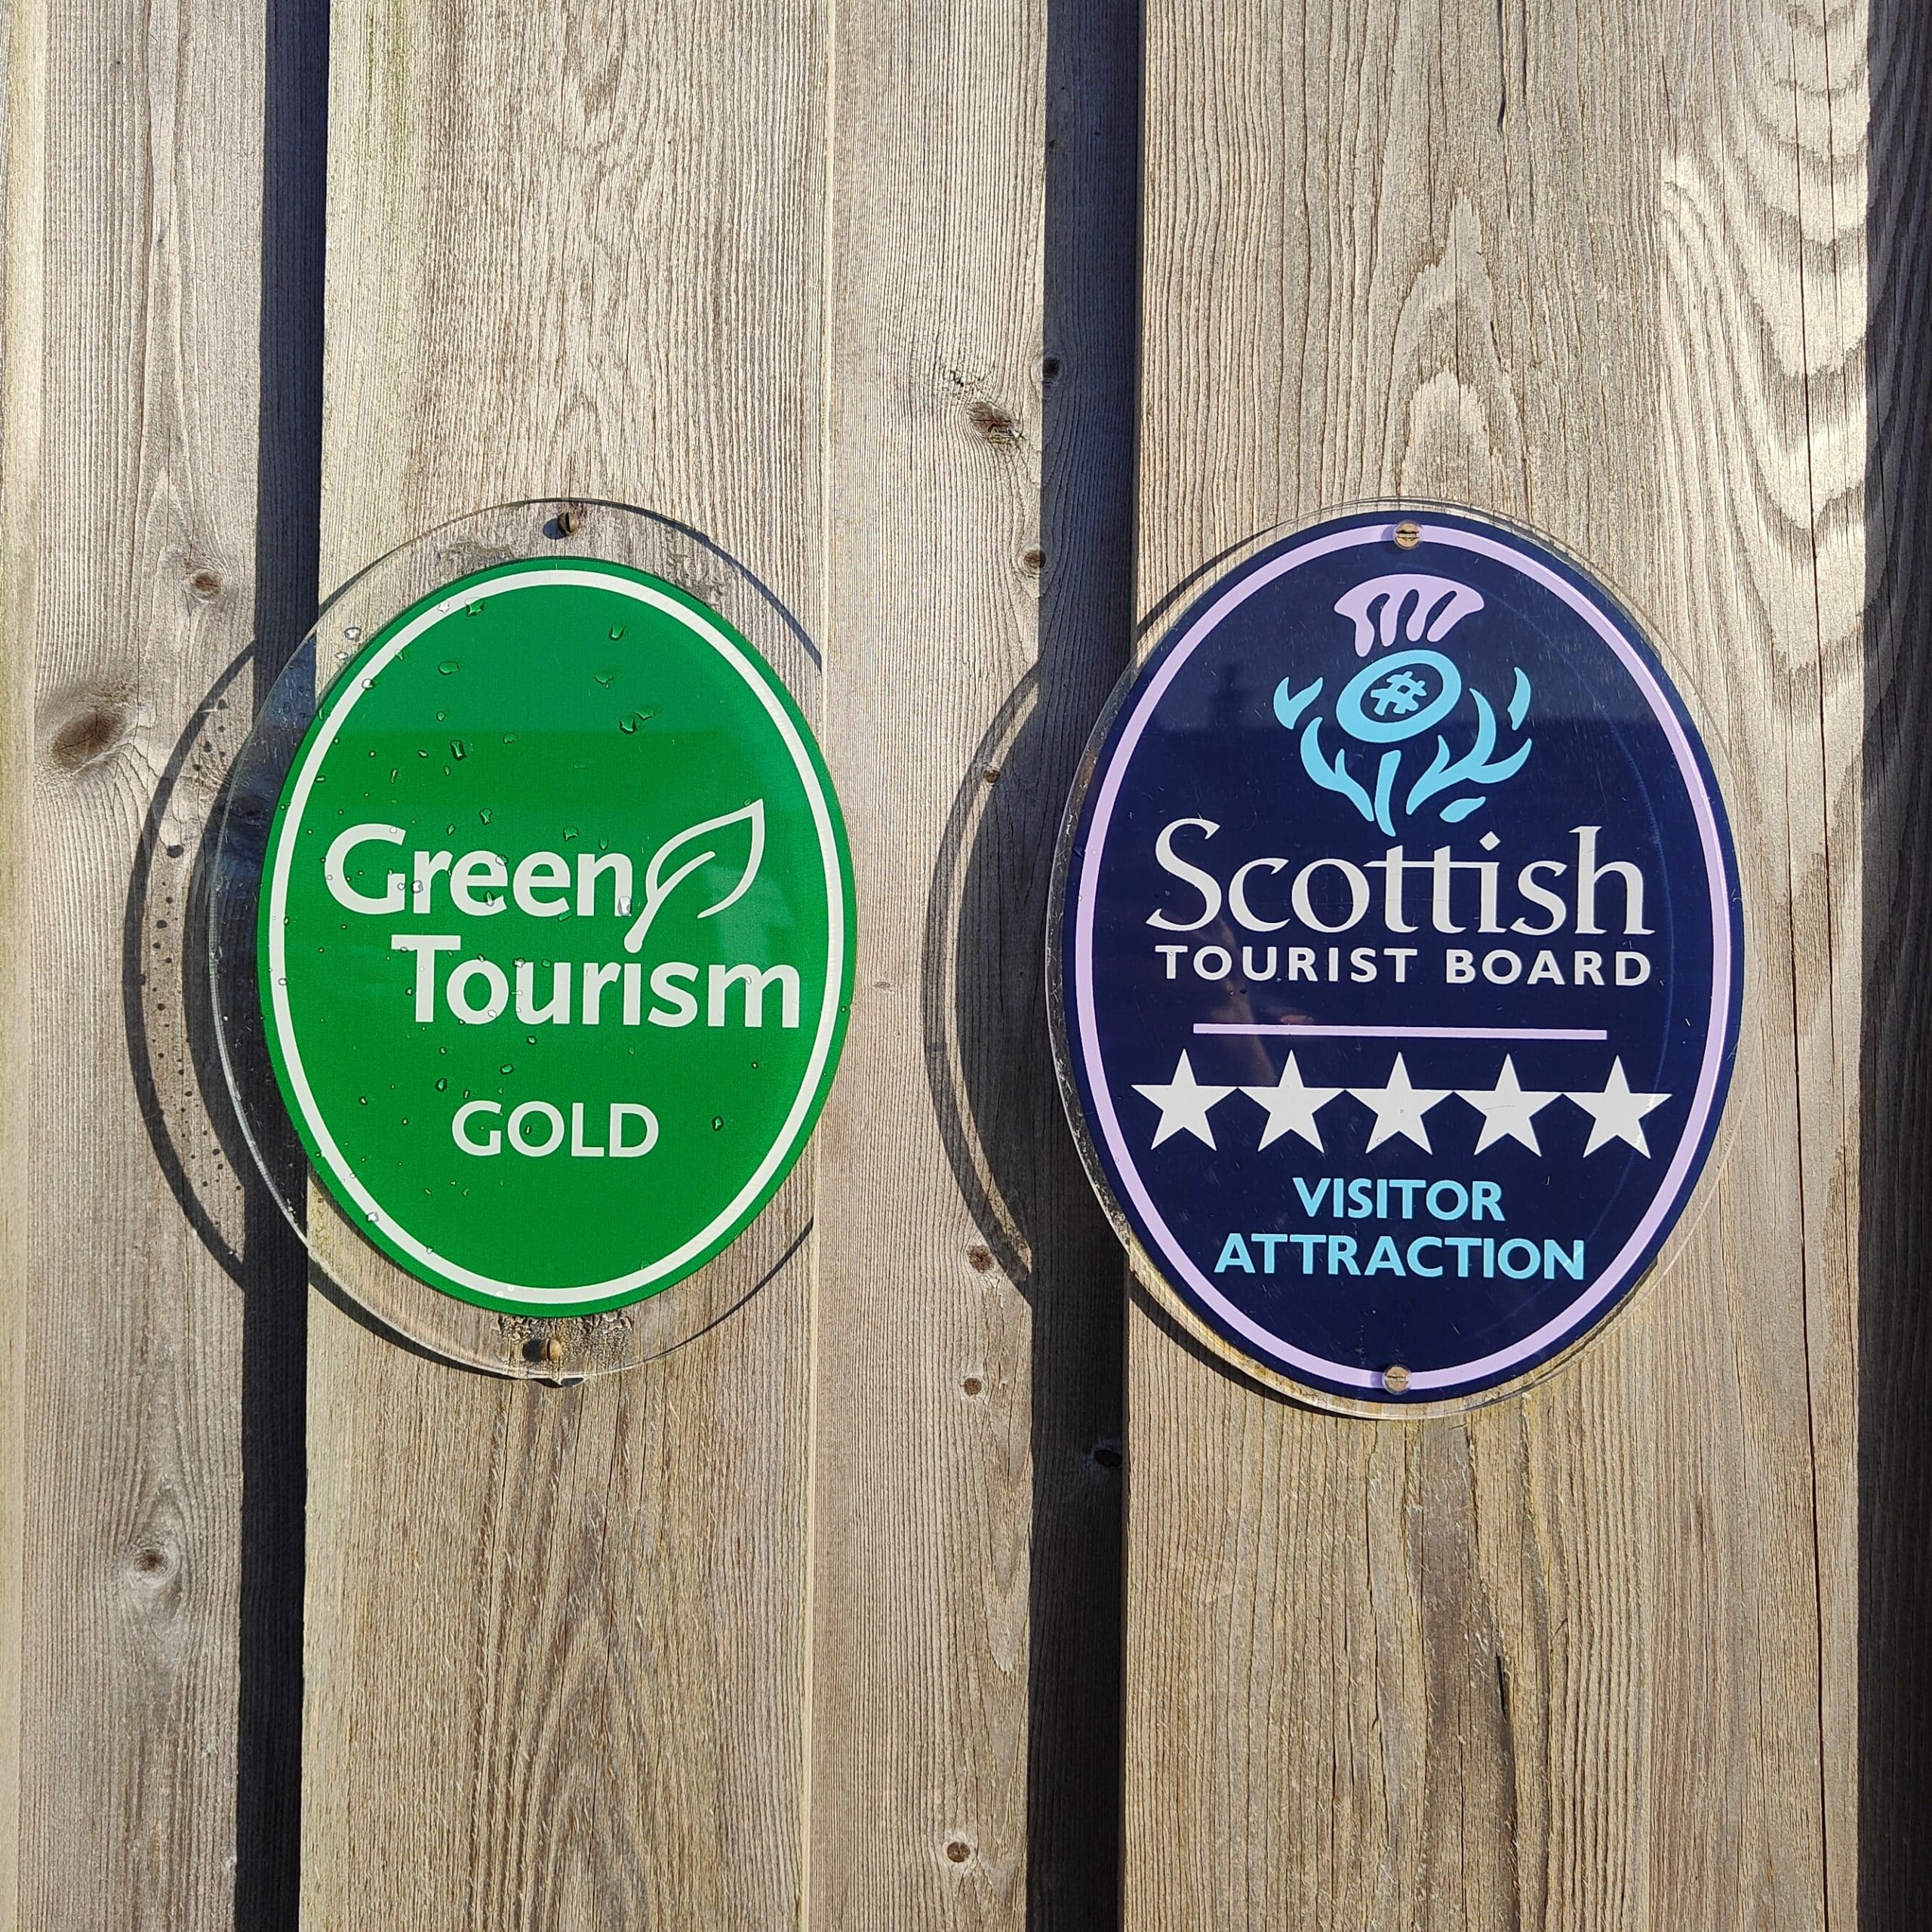 Picture of Green Tourism and Scottish Tourist Board awards on wood panel wall